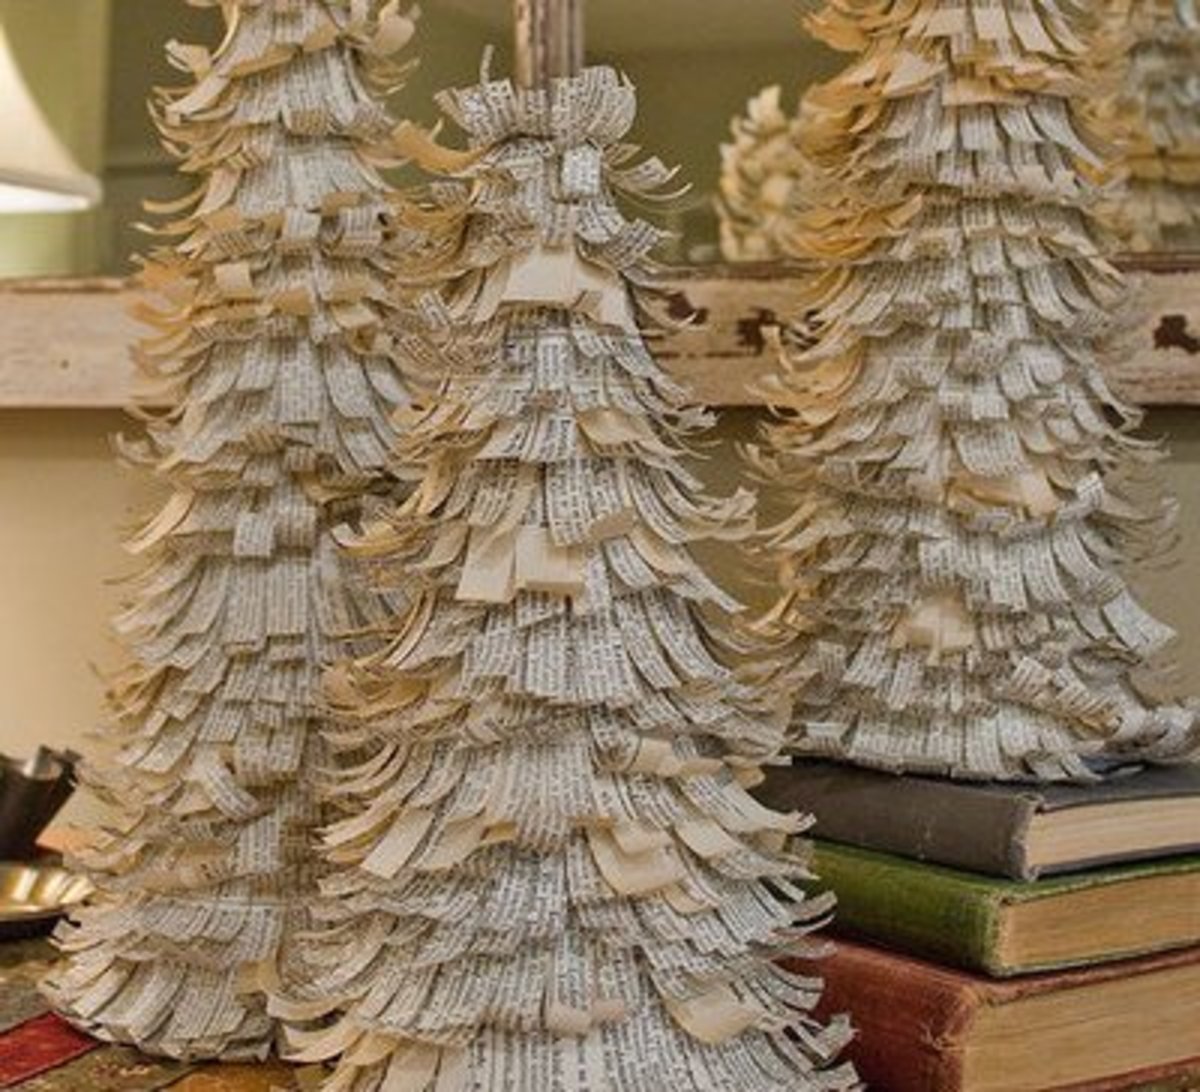 53 Creative Craft Ideas Using Book Pages | FeltMagnet